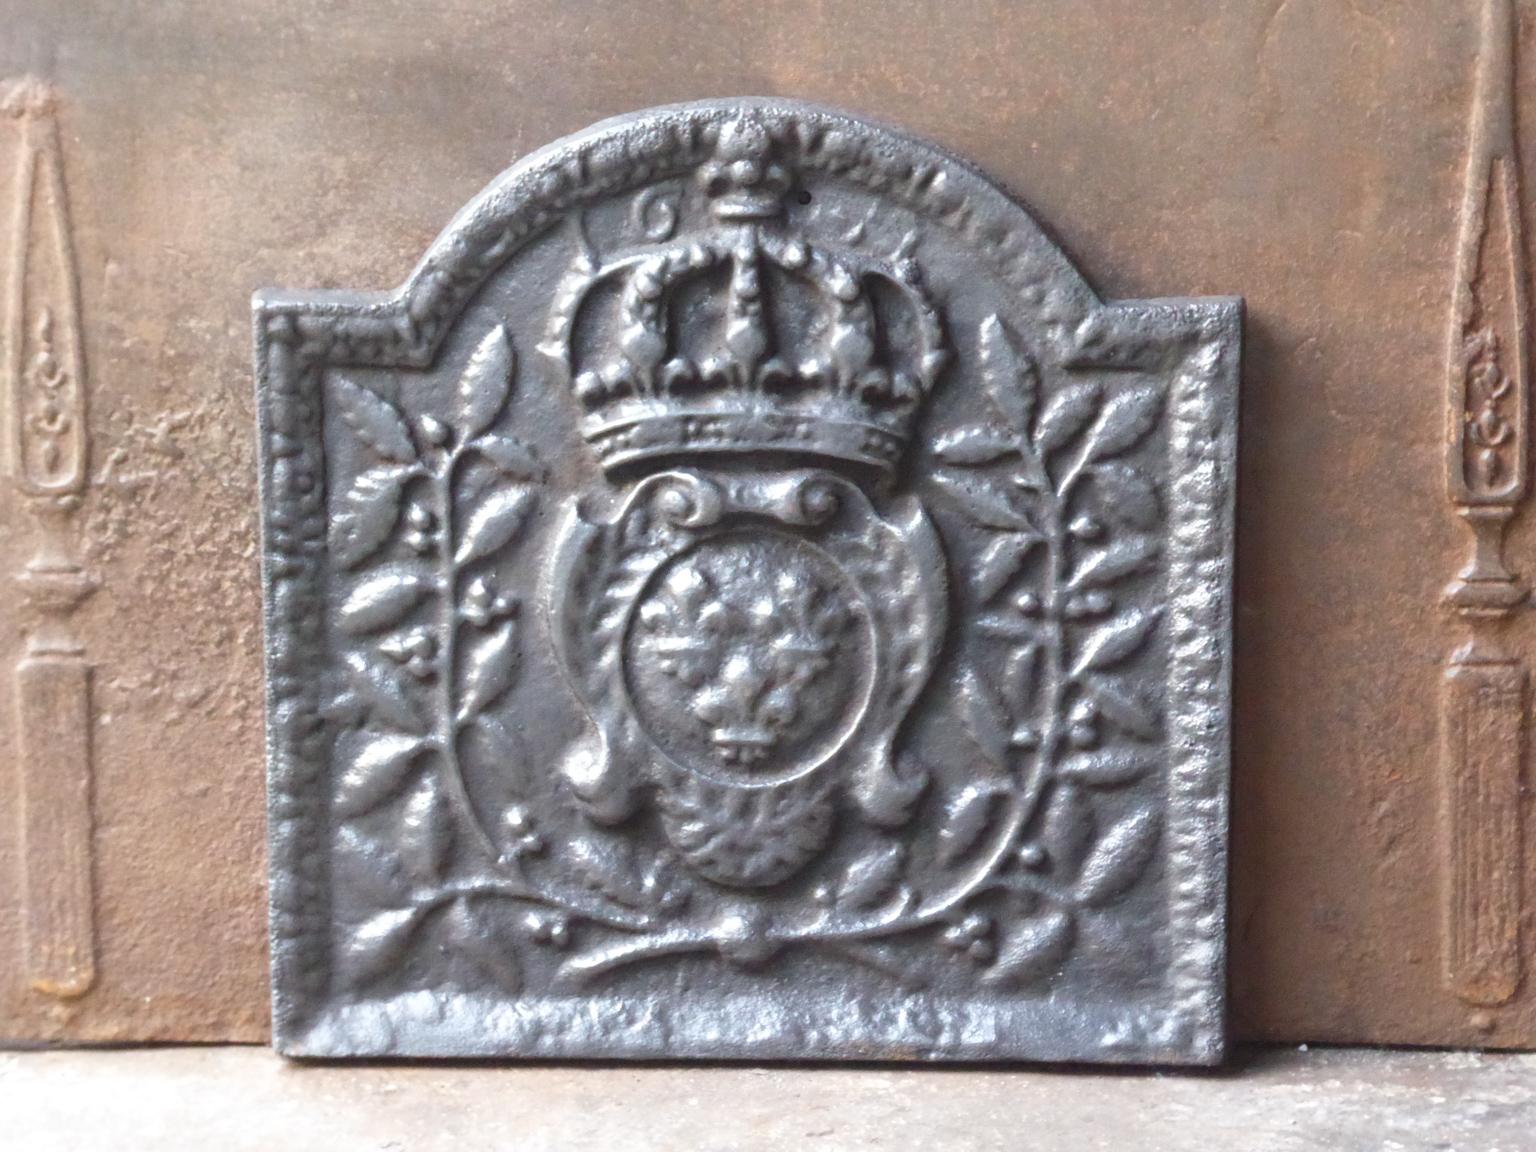 French Louis XIV style fireback with the arms of France. Coat of arms of the House of Bourbon, an originally French royal house that became a major dynasty in Europe. It delivered kings for Spain (Navarra), France, both Sicilies and Parma. Bourbon